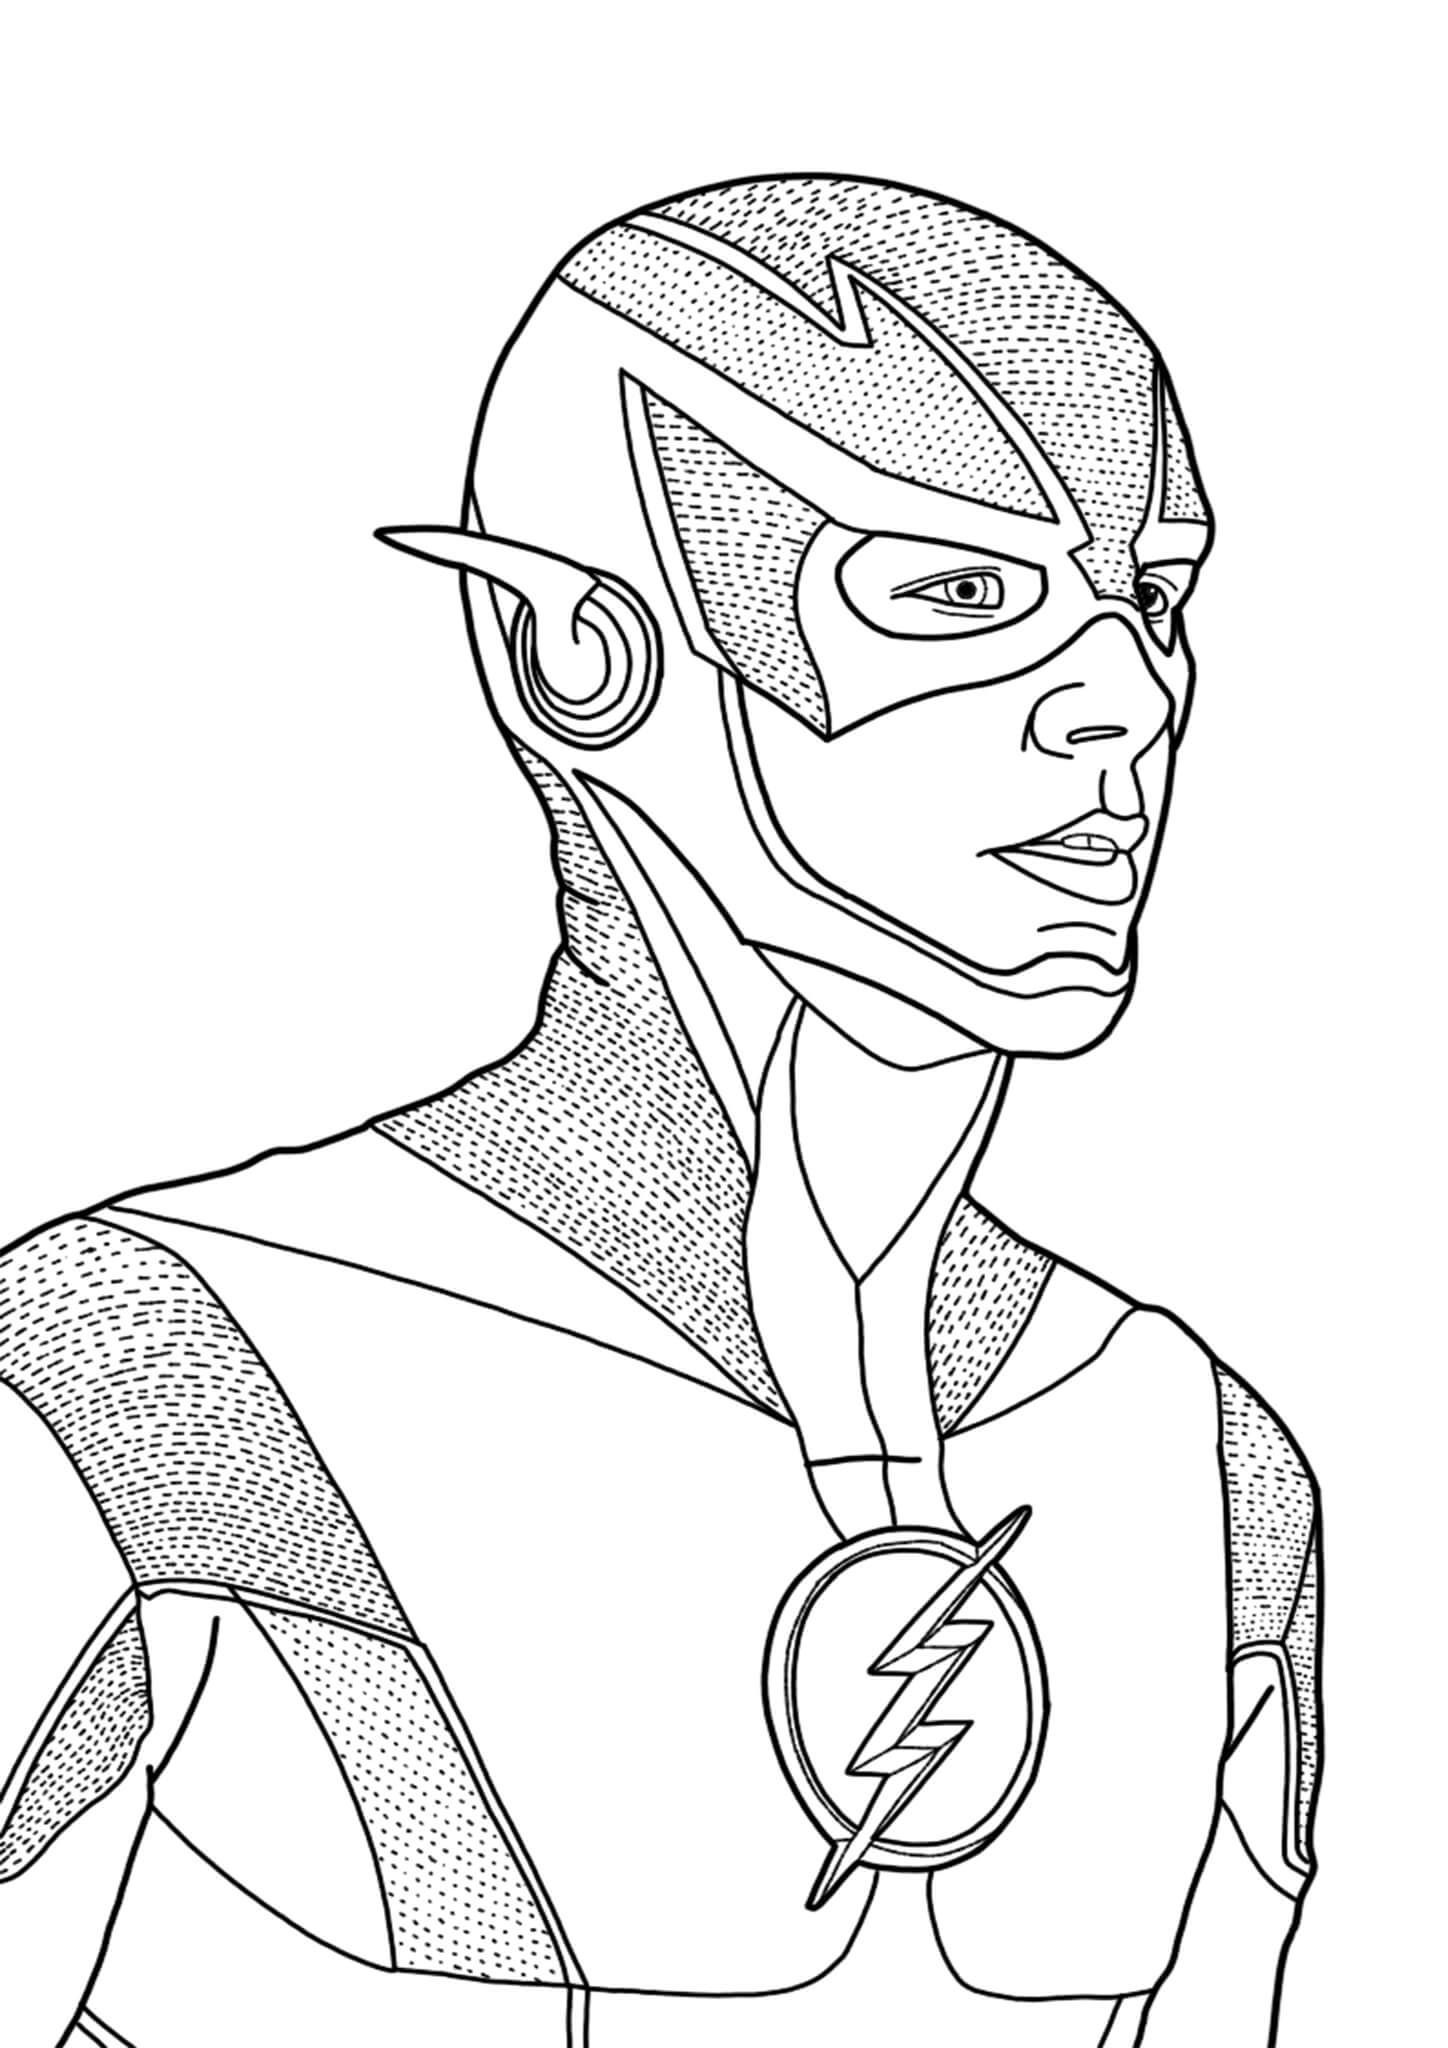 Free easy to print flash coloring pages superhero coloring pages superhero coloring avengers coloring pages